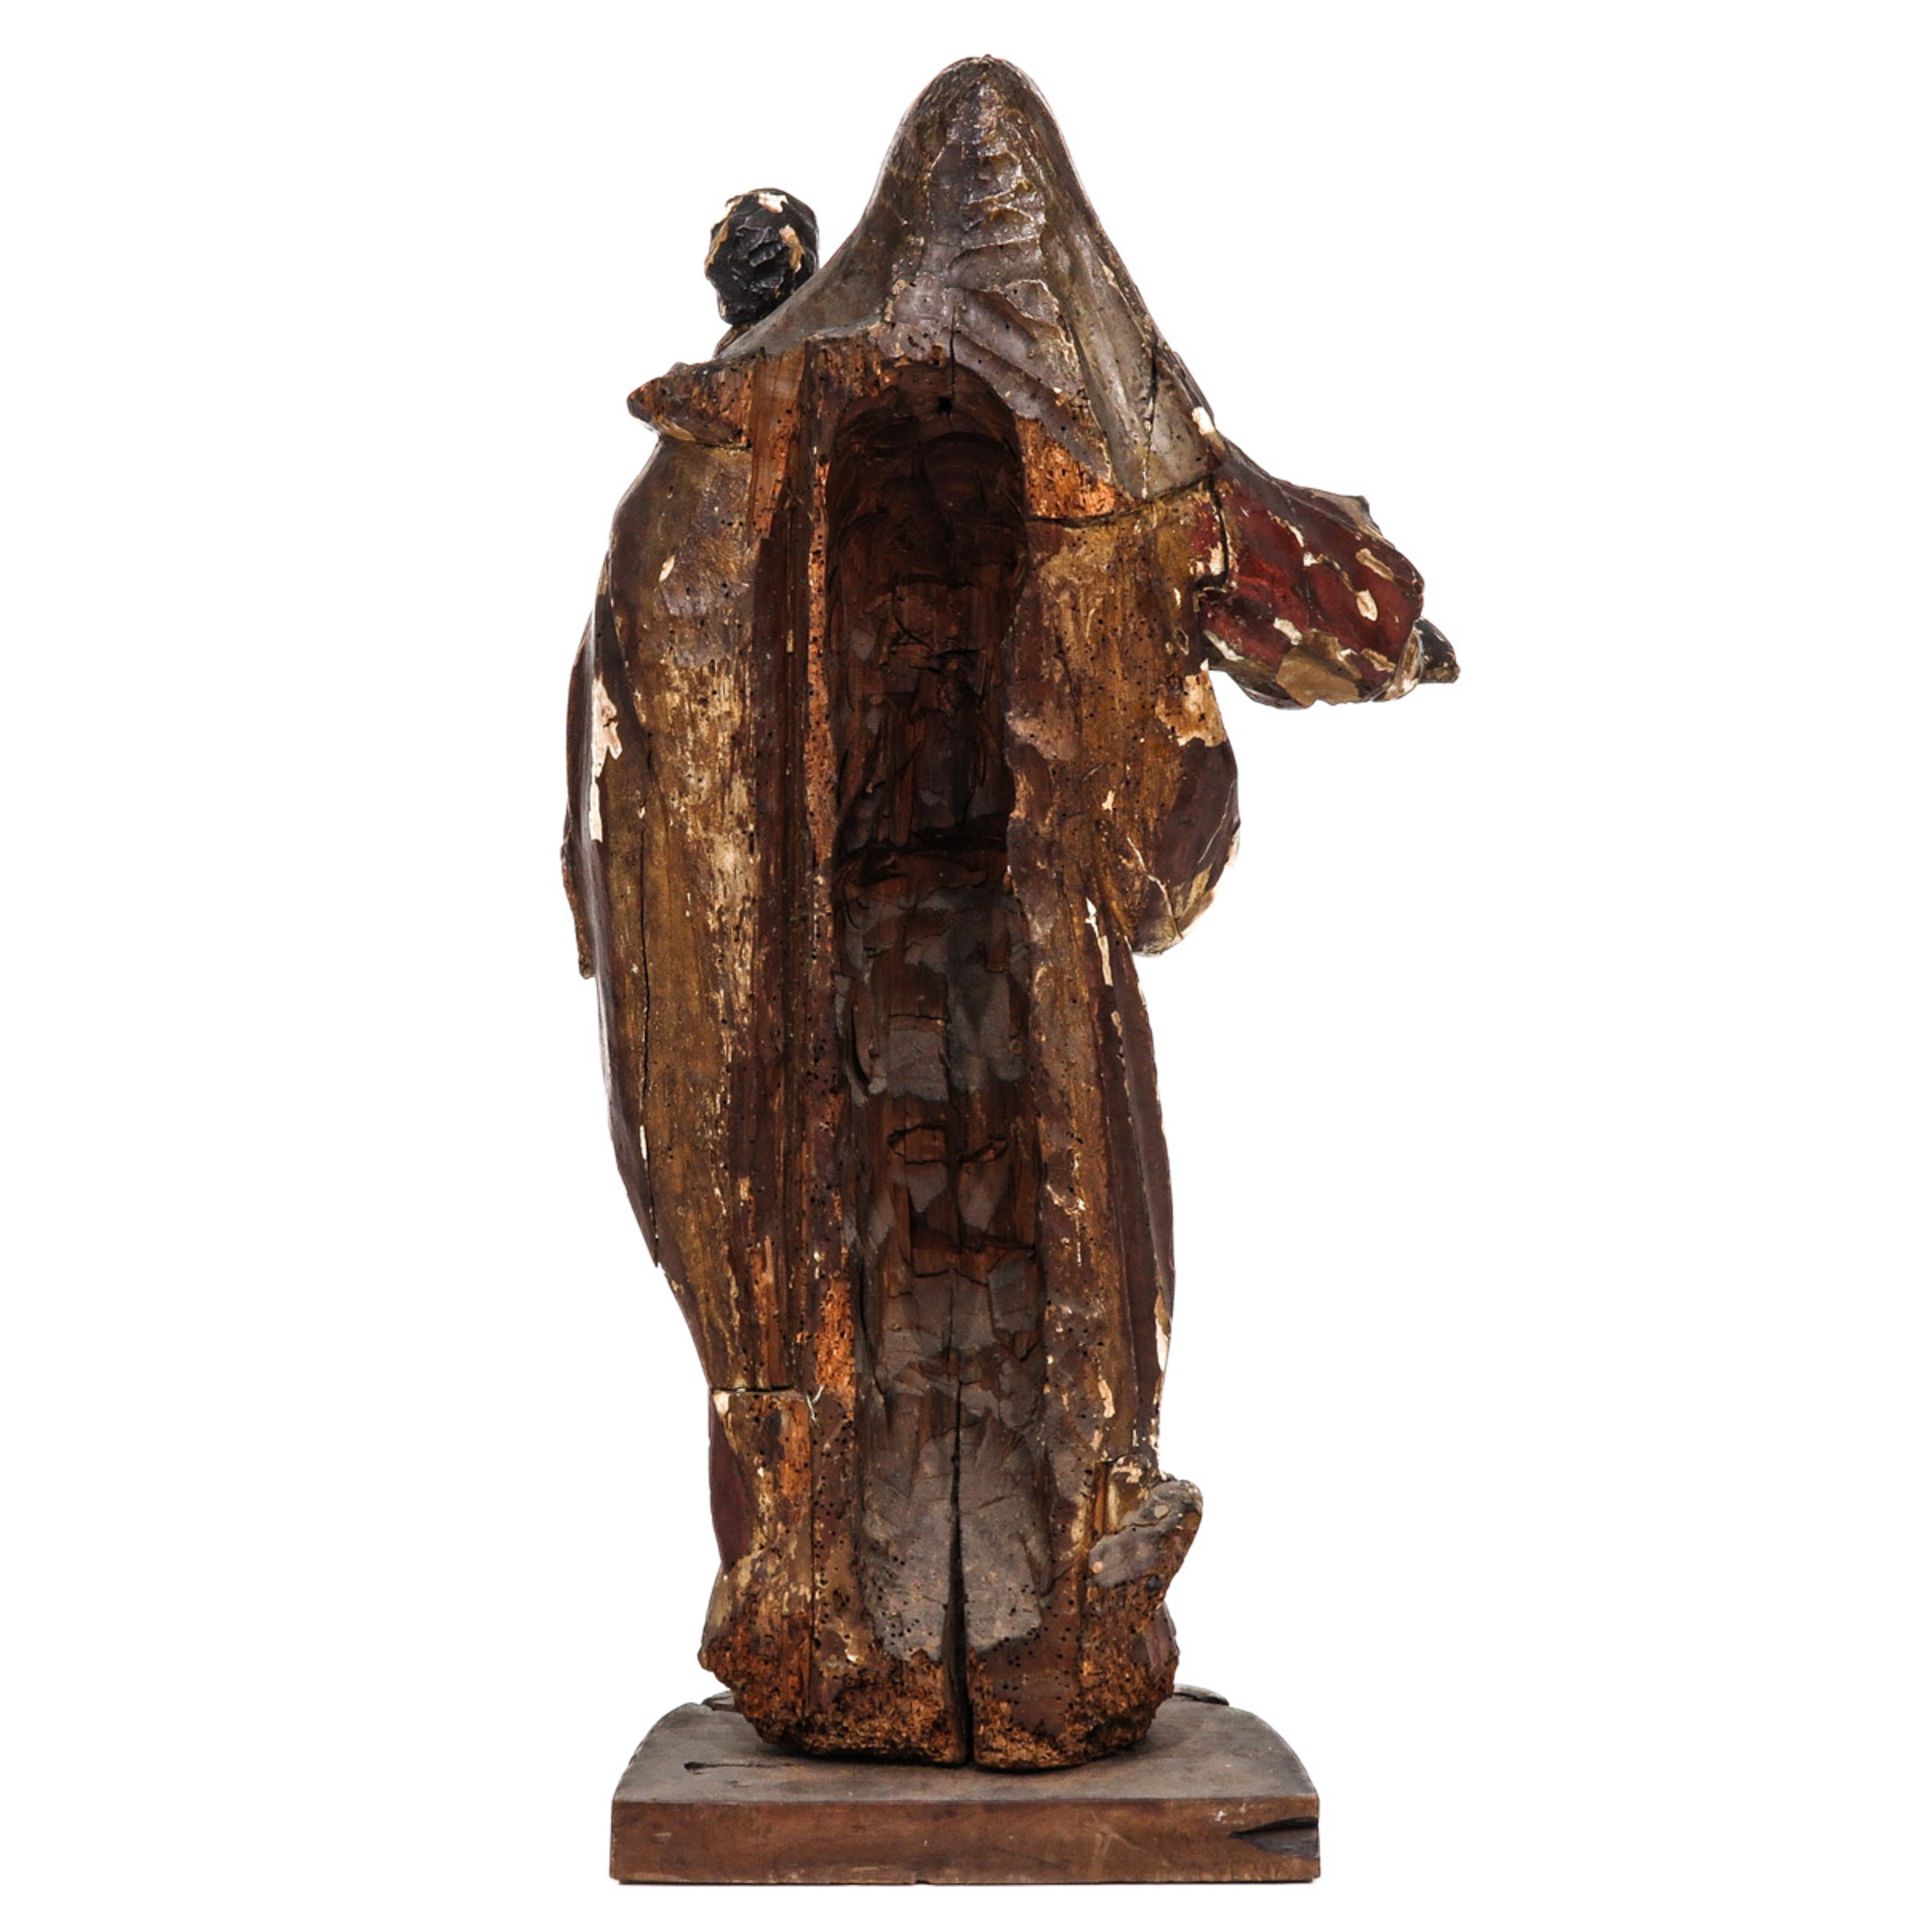 A Wood Sculpture of the Black Madonna - Image 3 of 10